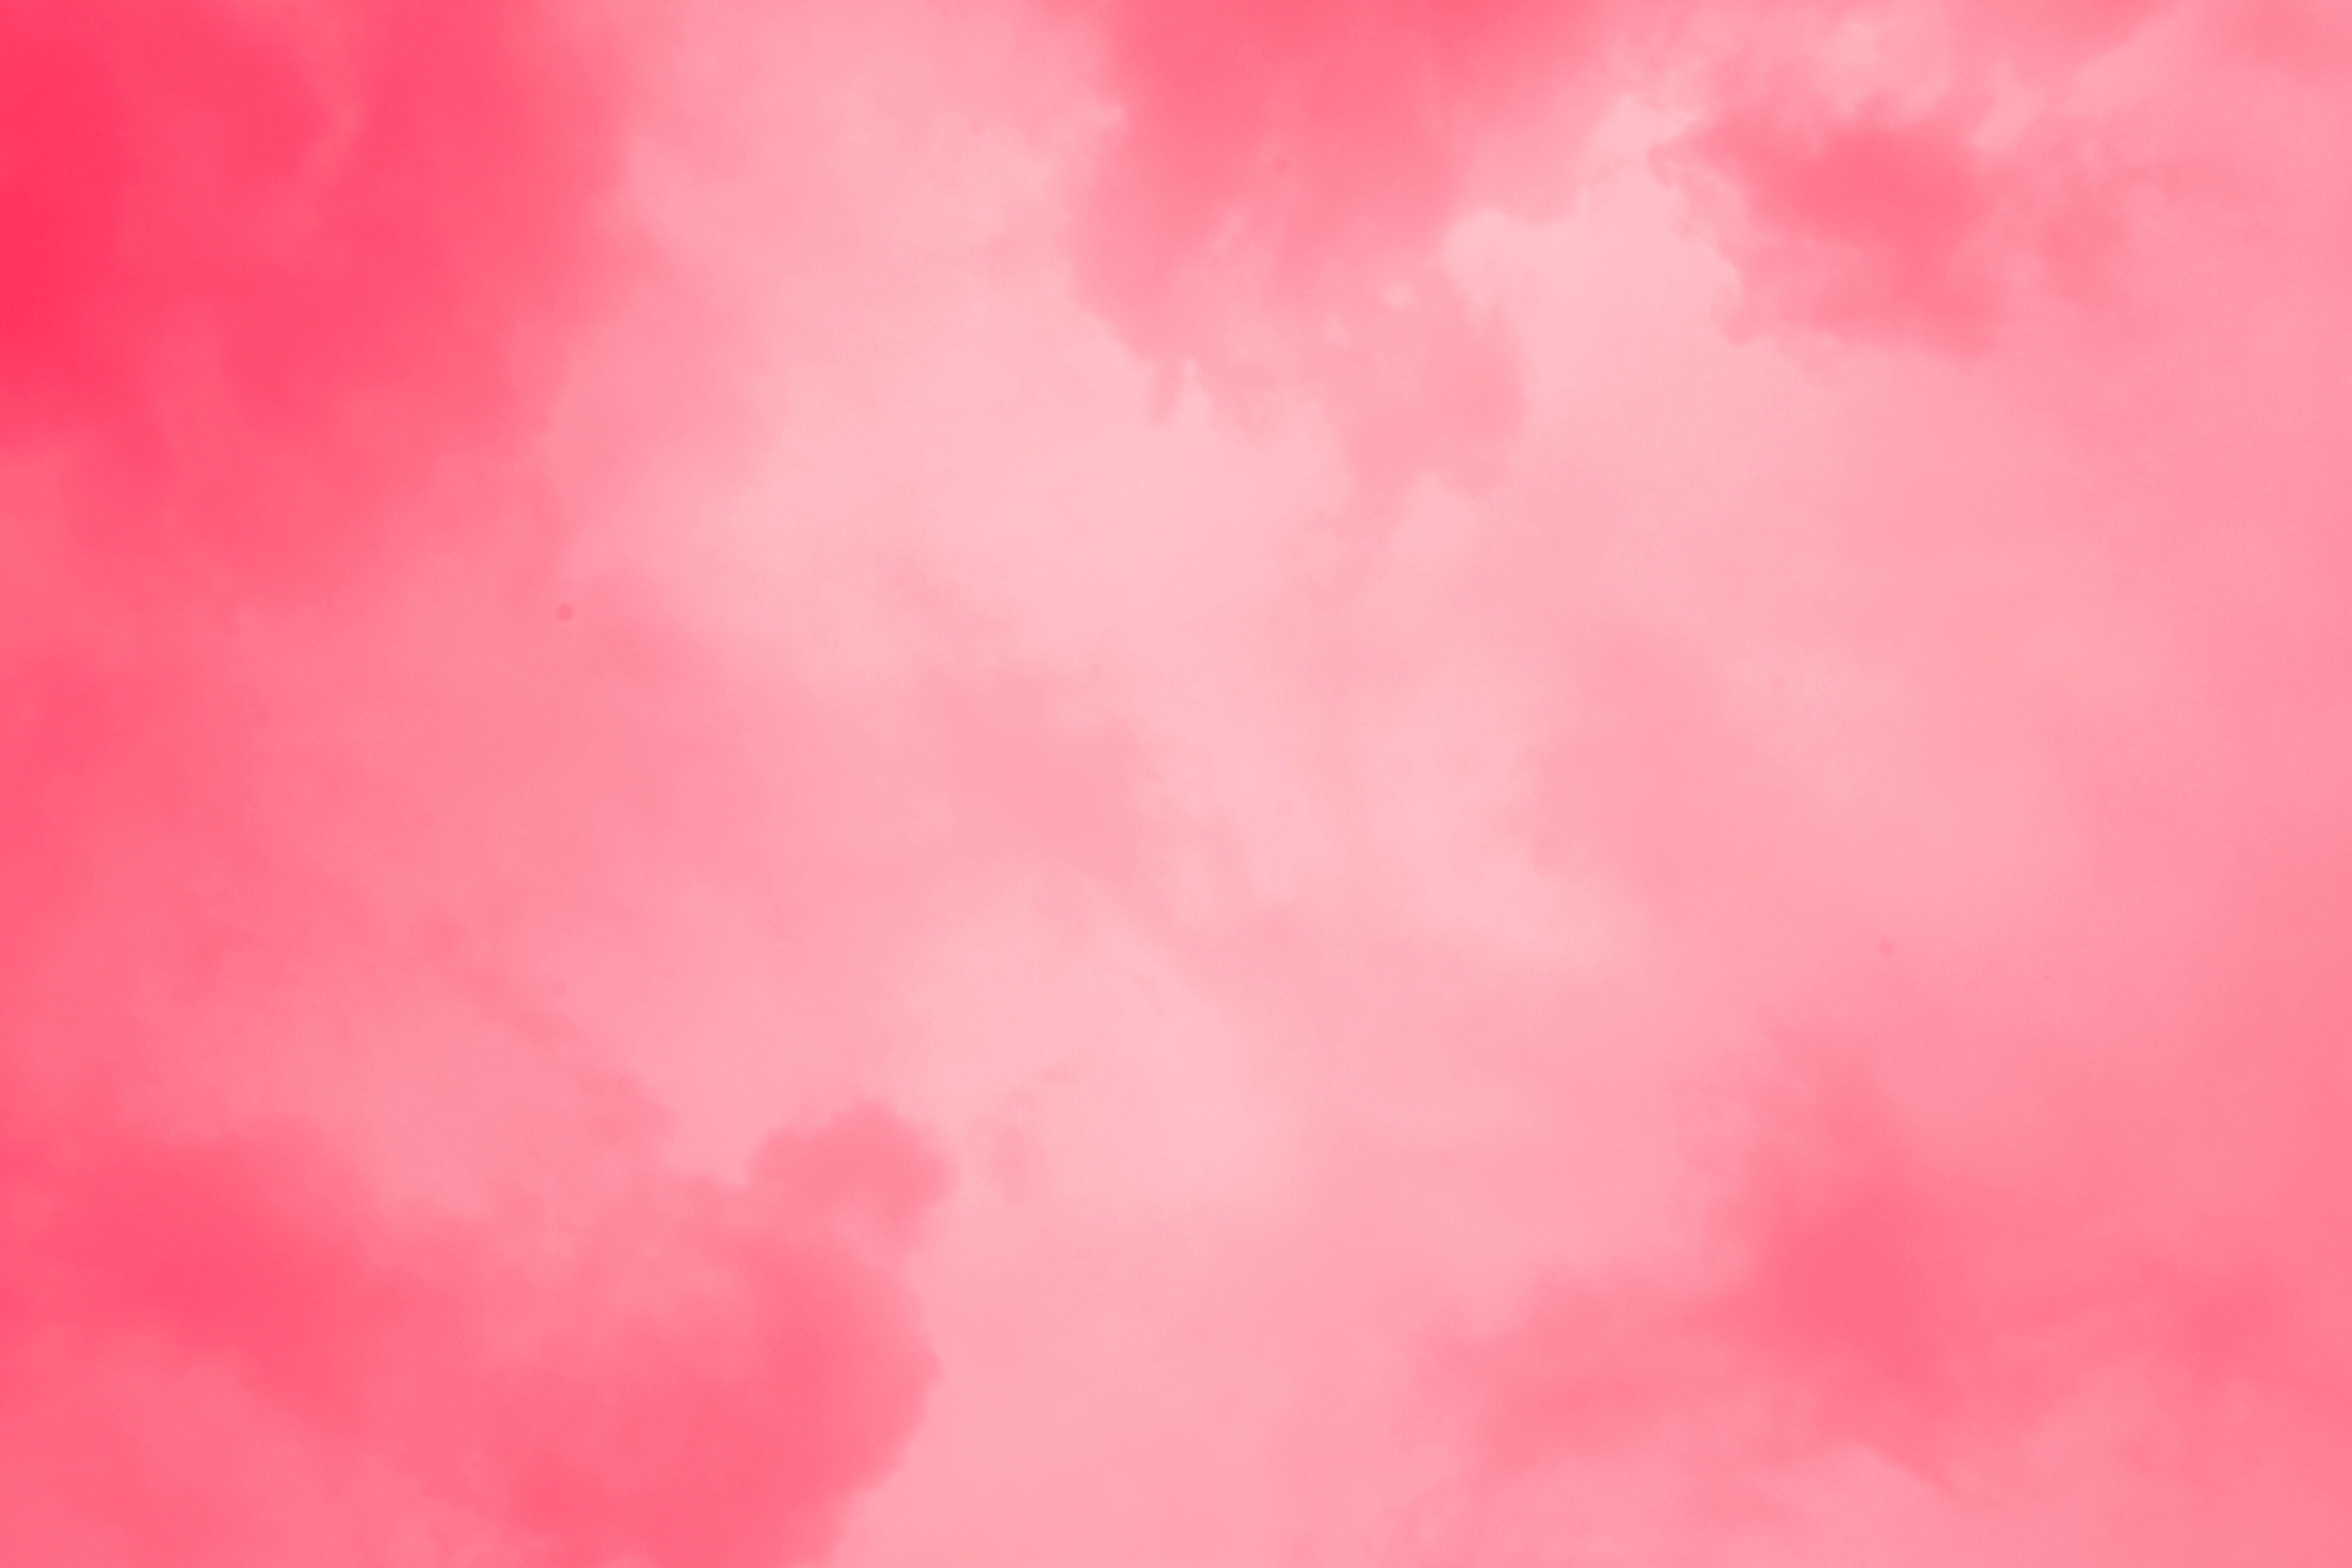 Baby Pink Background Hd - 6000x4000 Wallpaper 